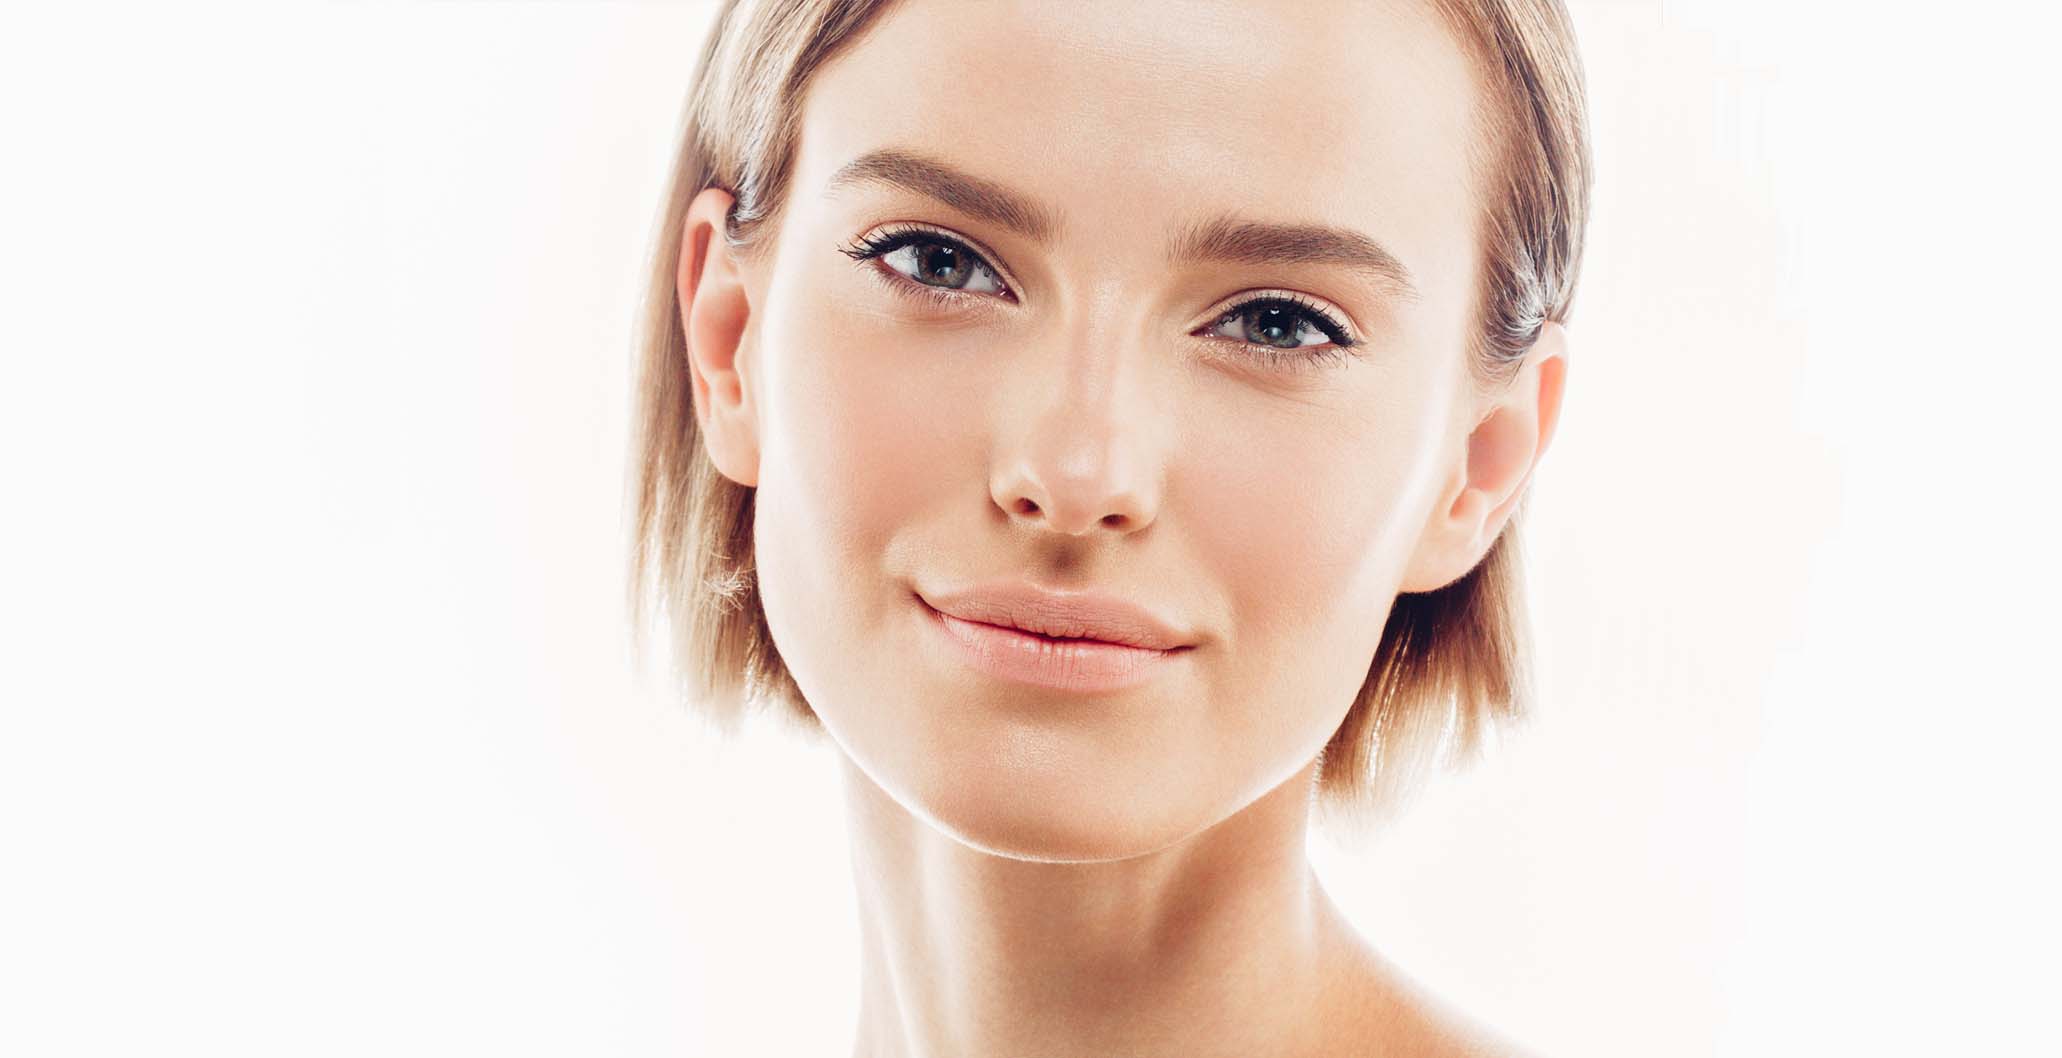 What Makes The Preservation Rhinoplasty So Special?